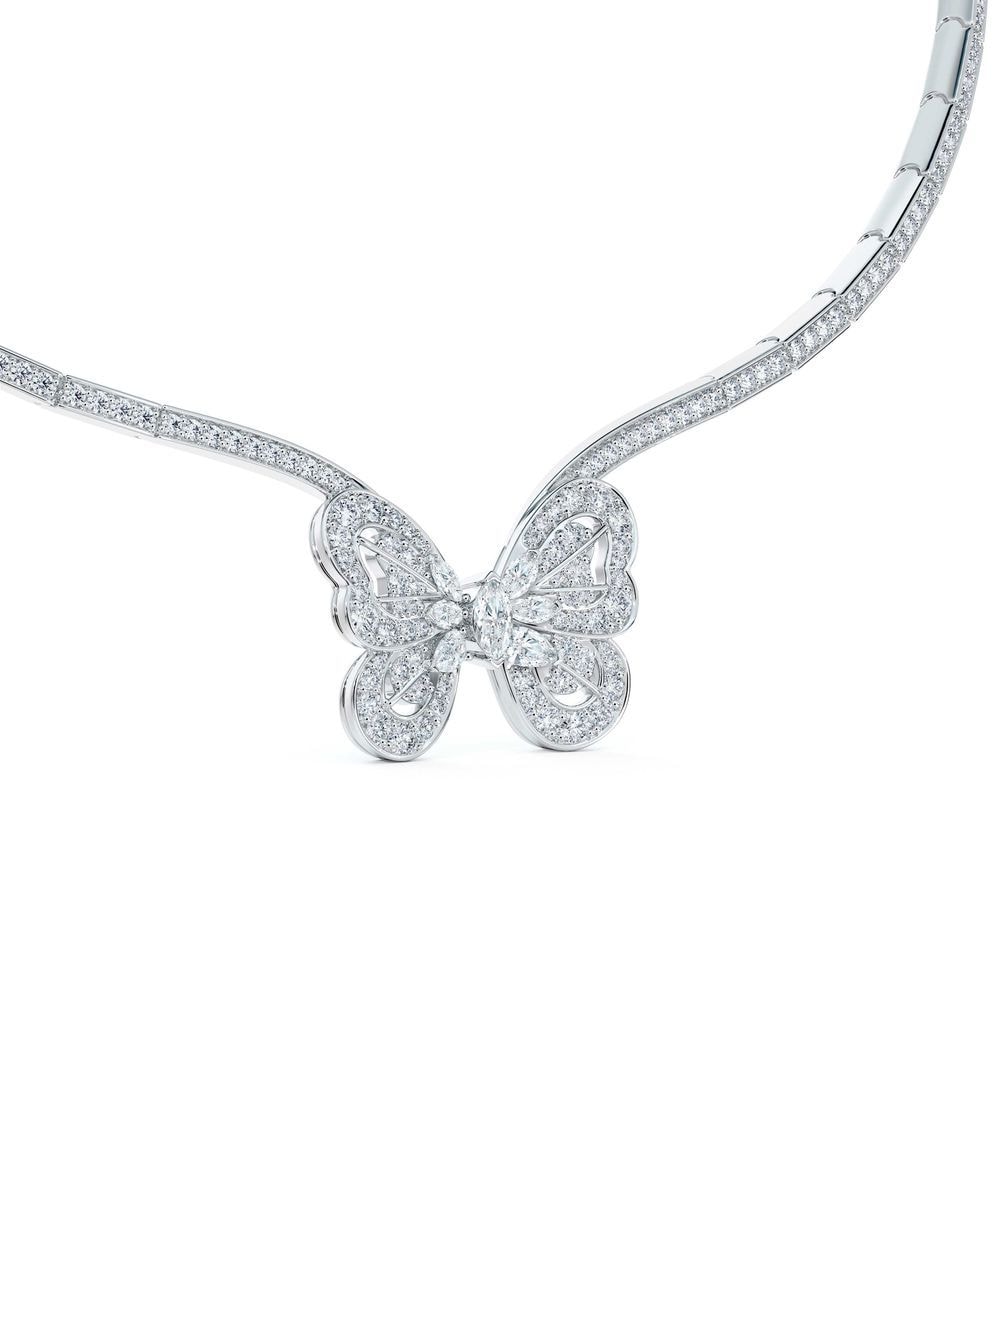 Image 1 of De Beers Jewellers 18kt white gold Portraits of Nature butterfly diamond necklace